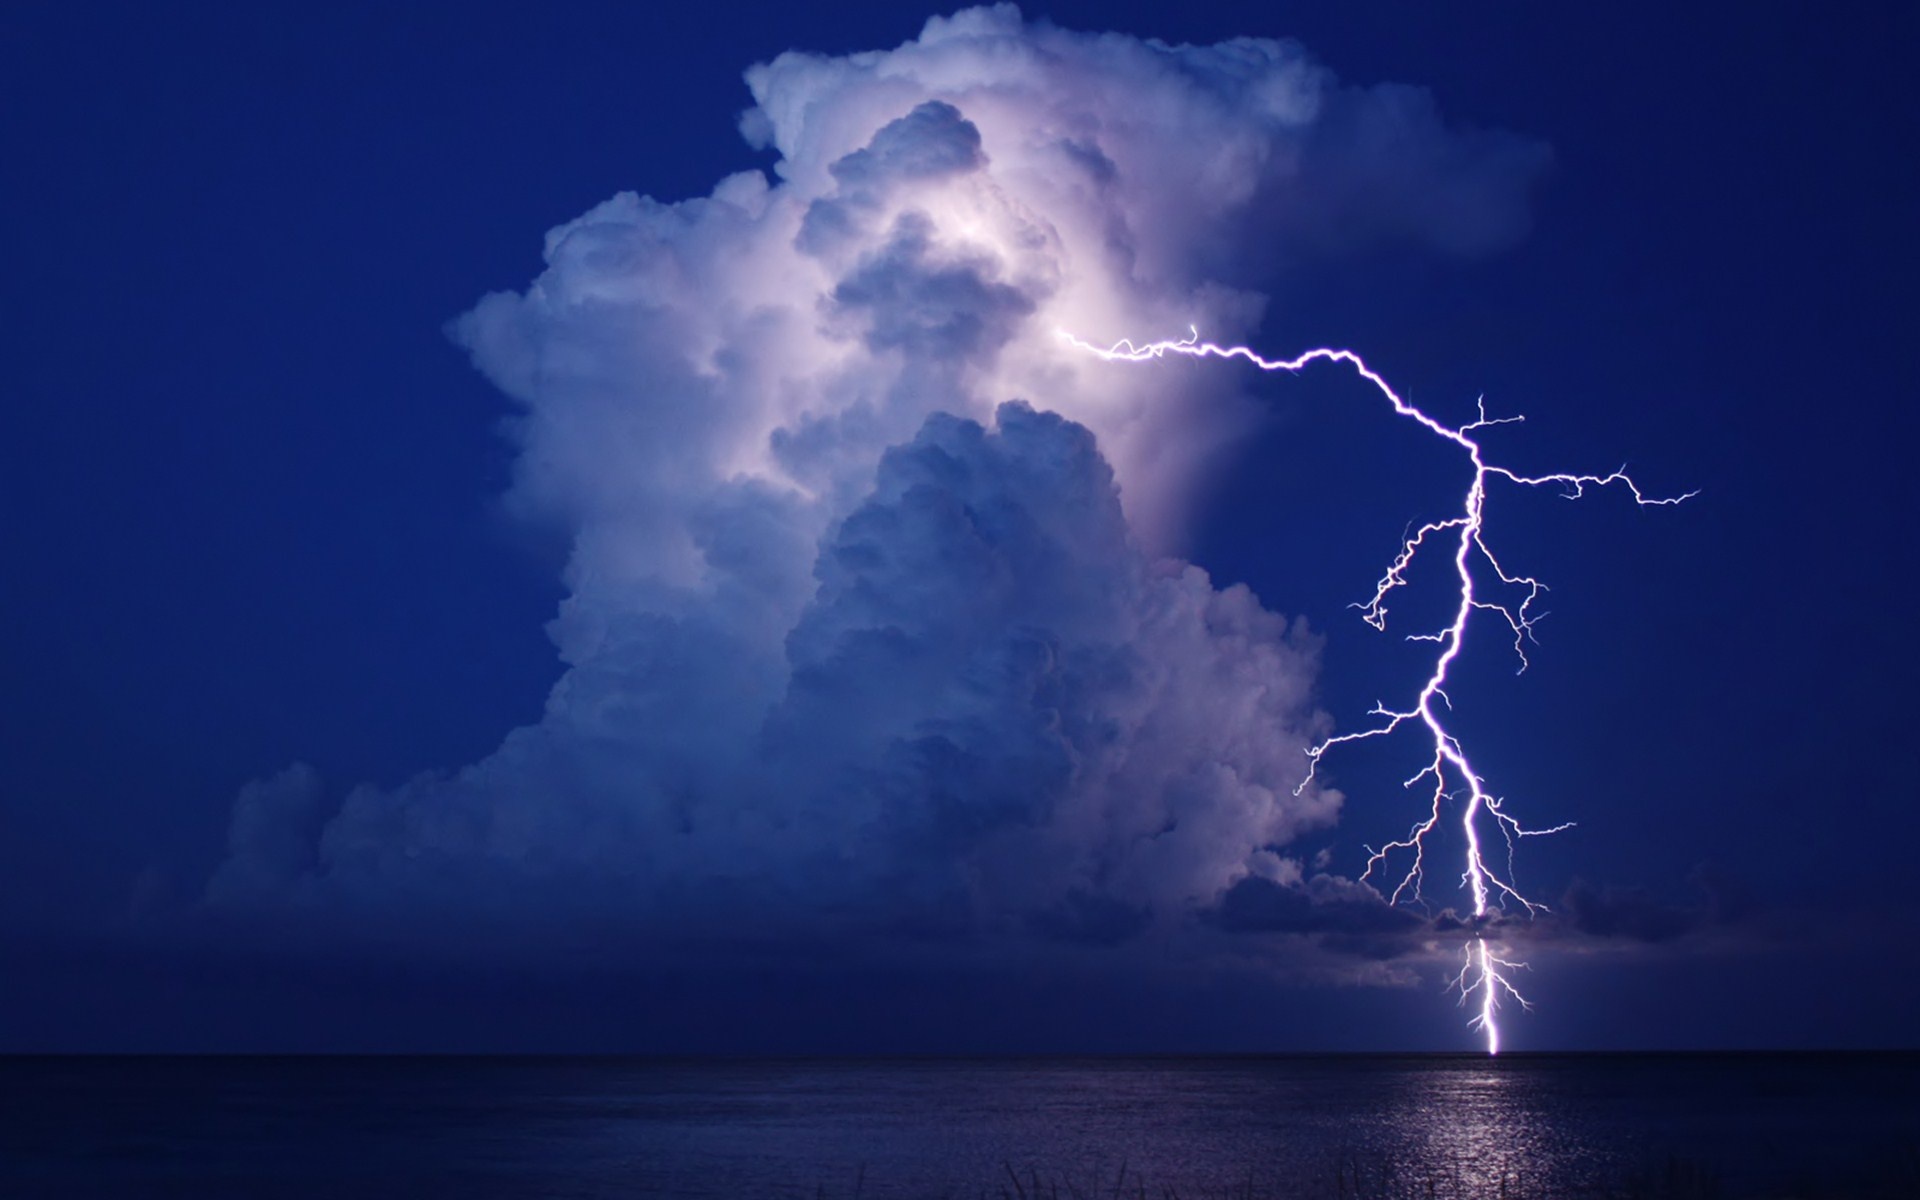 Ocean Storm Lightning Image Amp Pictures Becuo